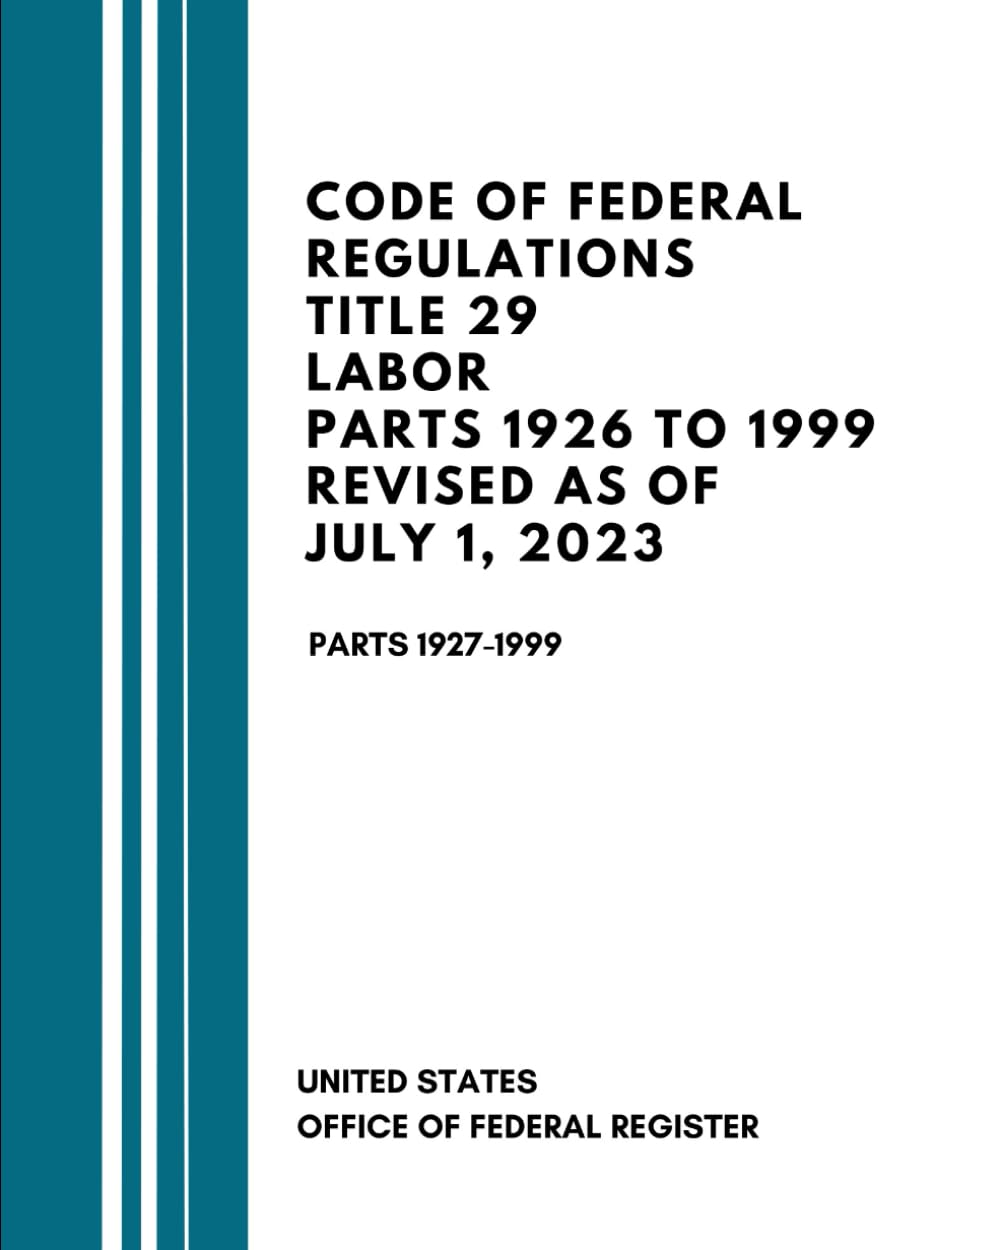 Code Of Federal Regulations Title 29 Labor Parts 1926 to 1999 Revised as of July 1, 2023: Parts 1927-1999